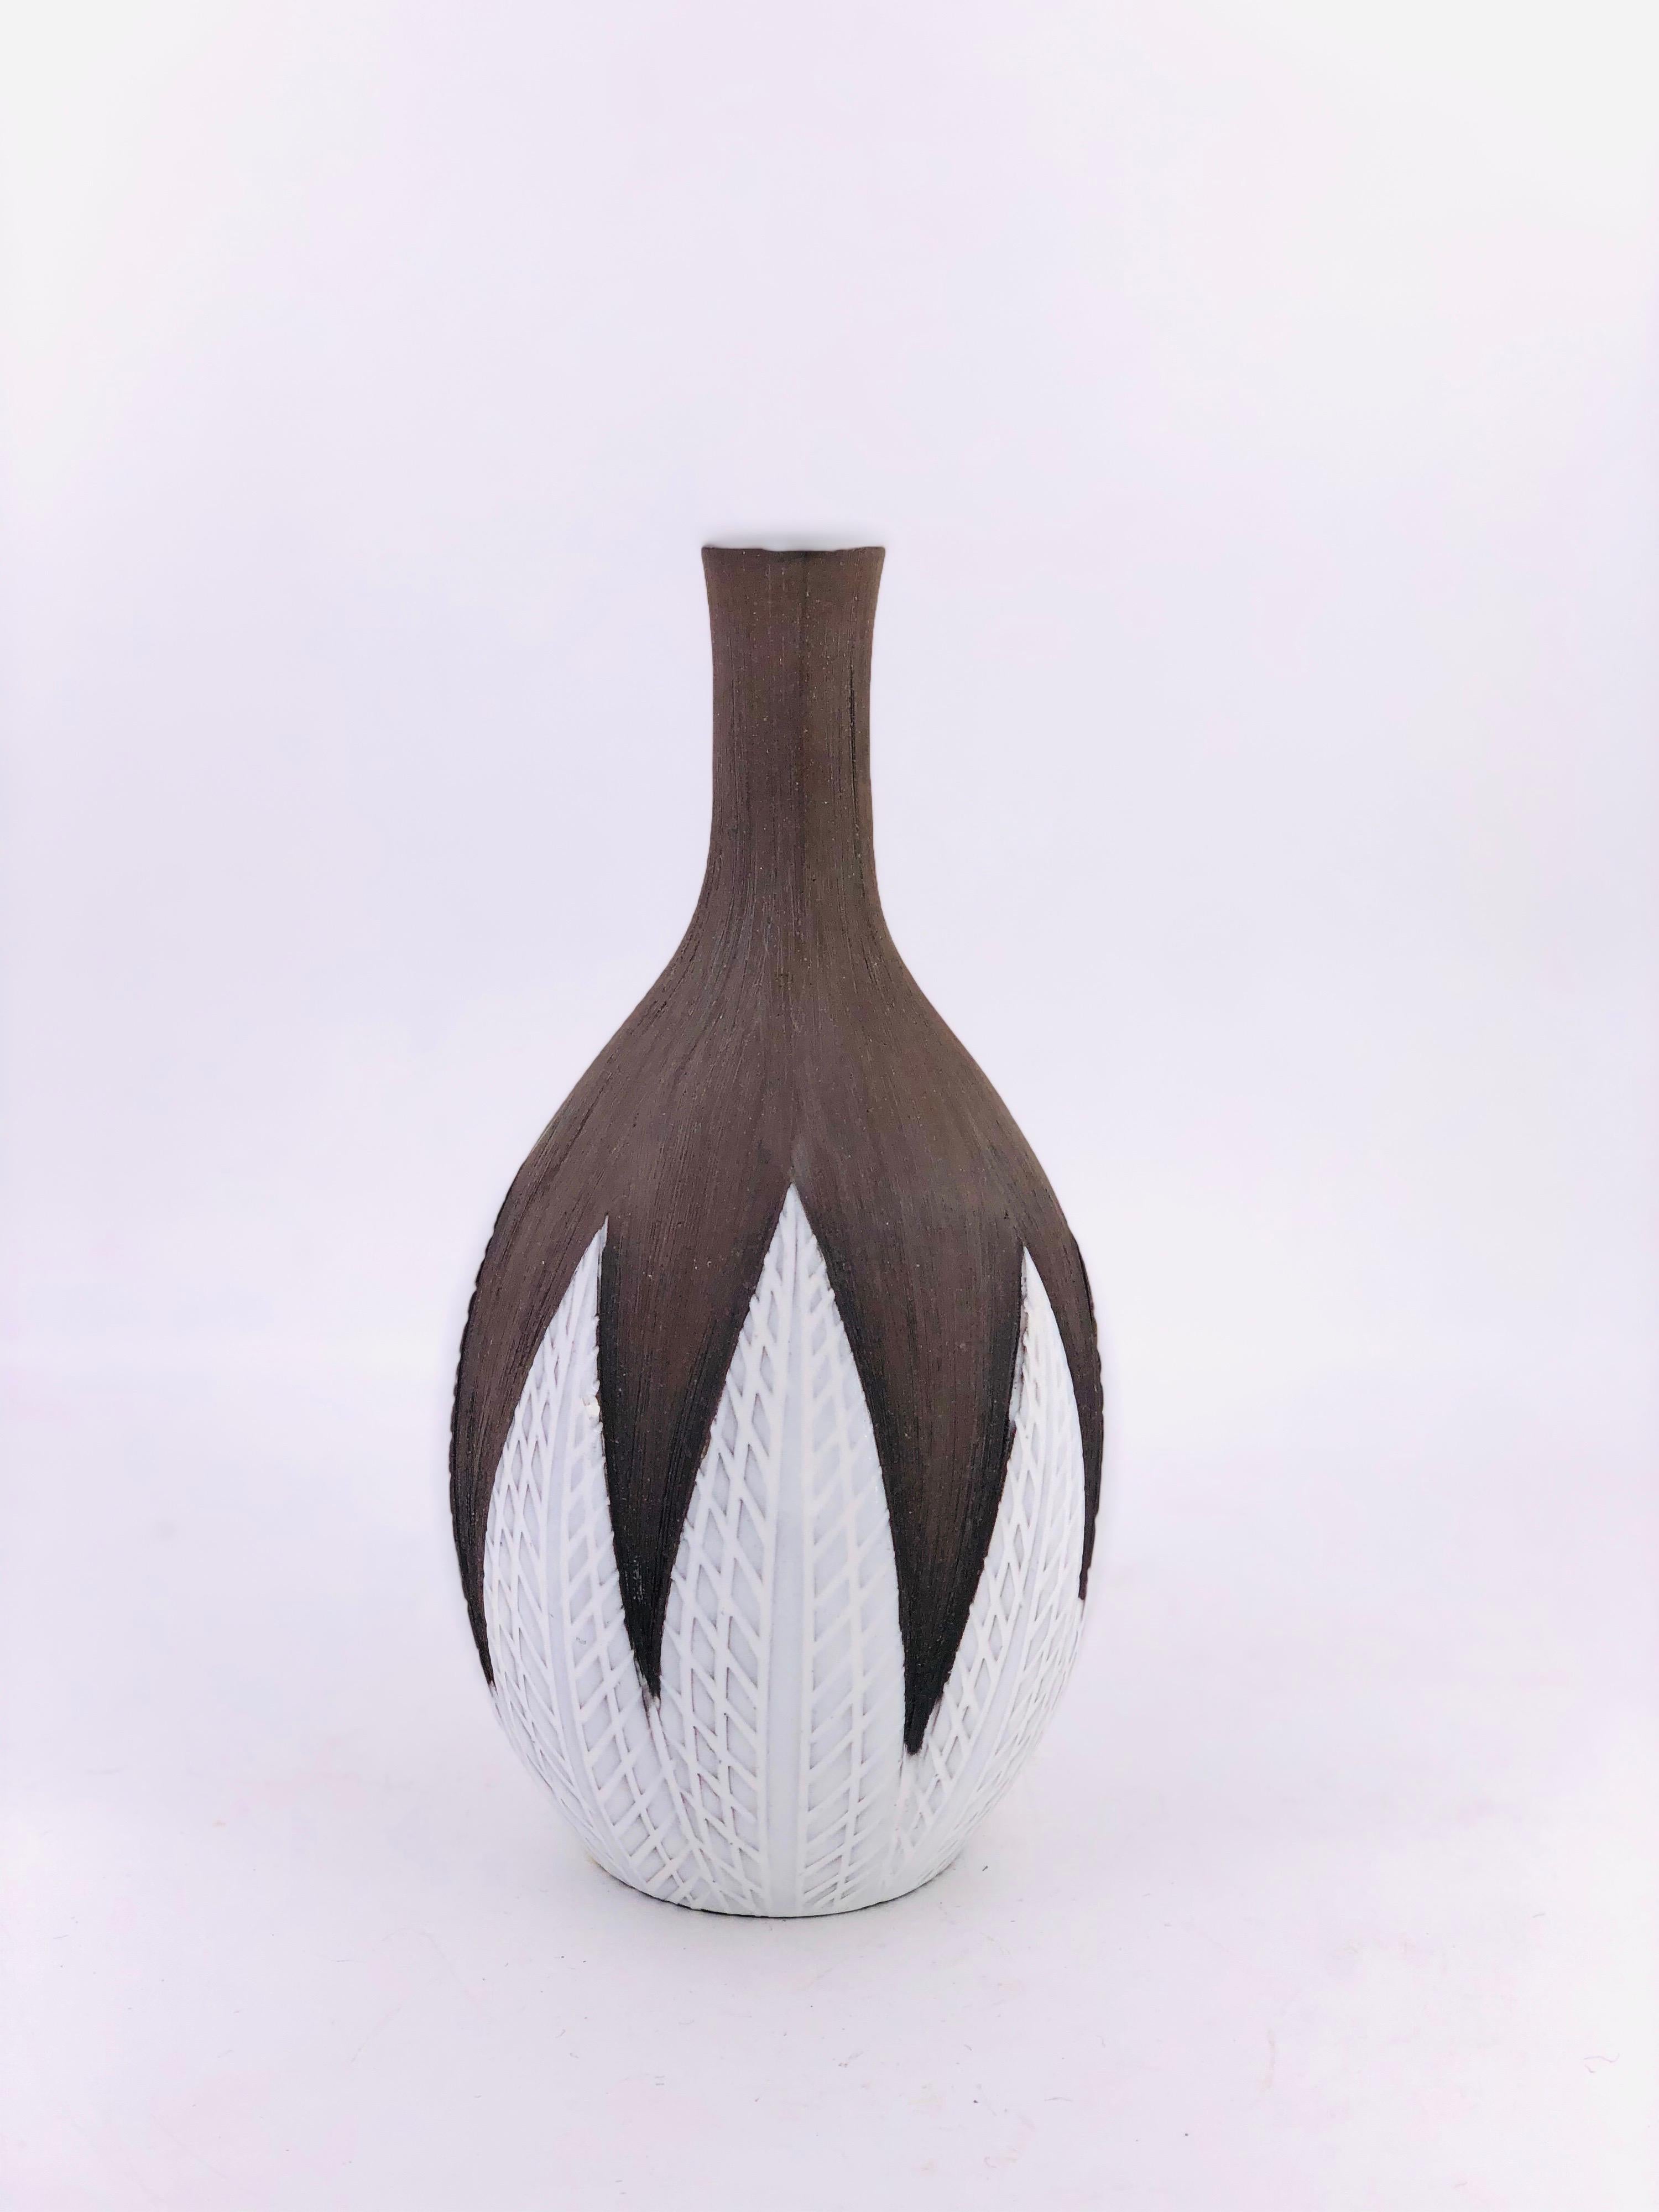 Marked UE 1018 ALT Vase. This Upsala Ekeby Studios, Sweden Mid-Century Modern piece is part of Anna-Lisa Thomson's work from her 1951 Paprika series. Measures approximate: 10